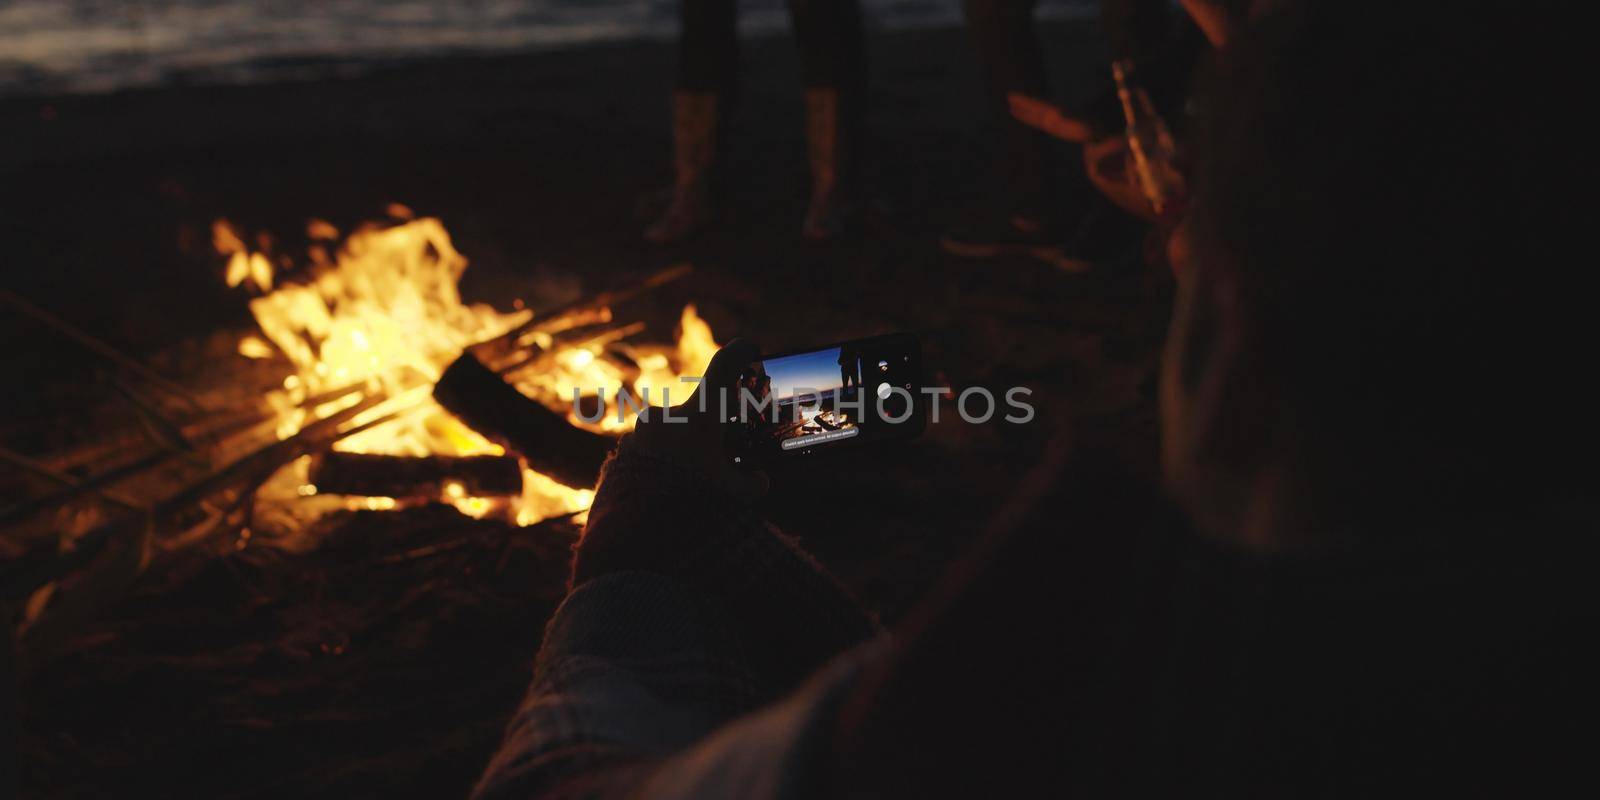 Couple taking photos beside campfire on beach by dotshock